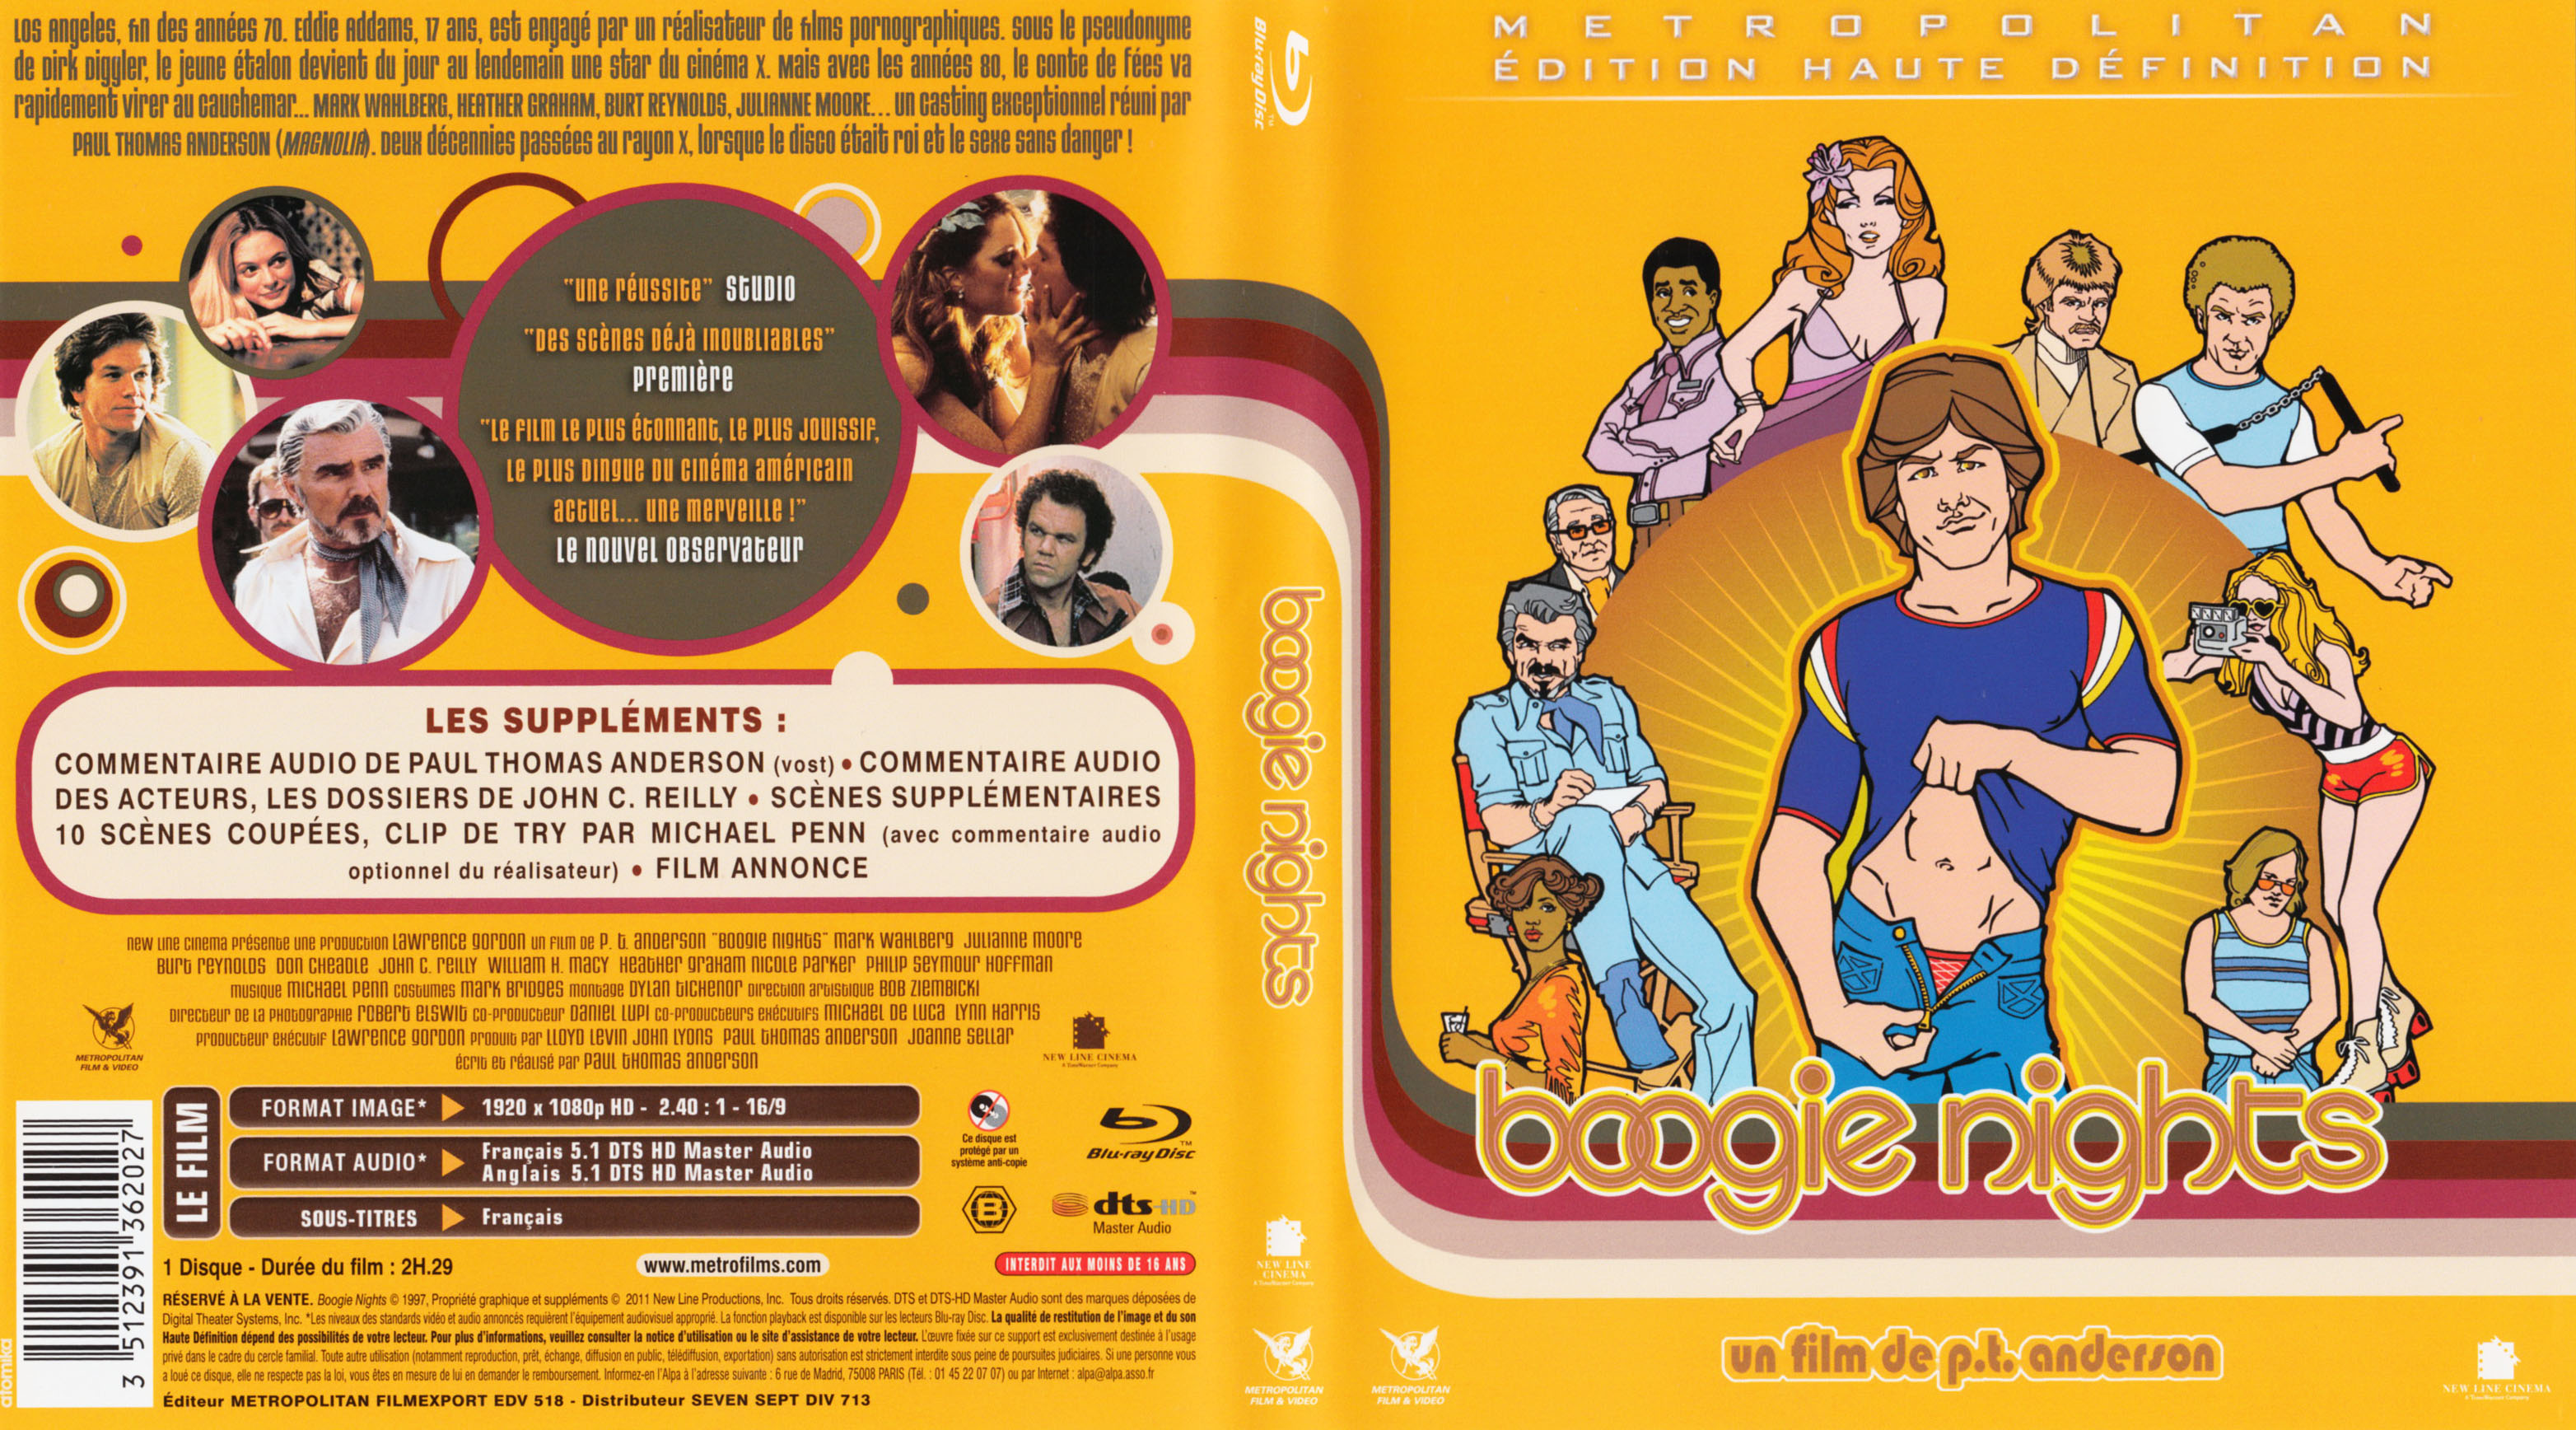 Jaquette DVD Boogie Nights (BLU-RAY)